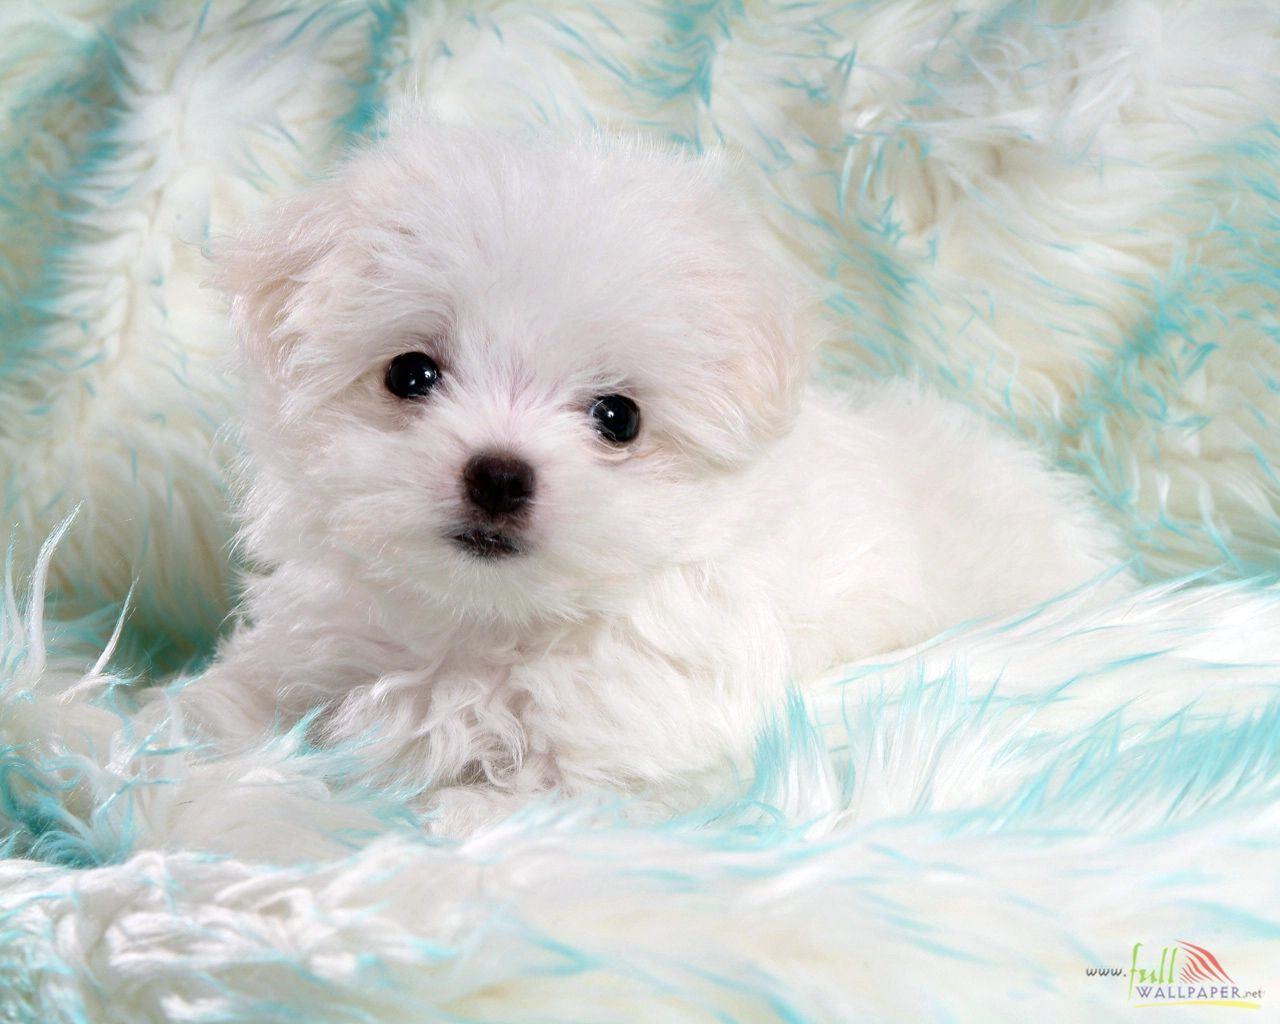 Baby Dog Wallpapers - Wallpaper Cave